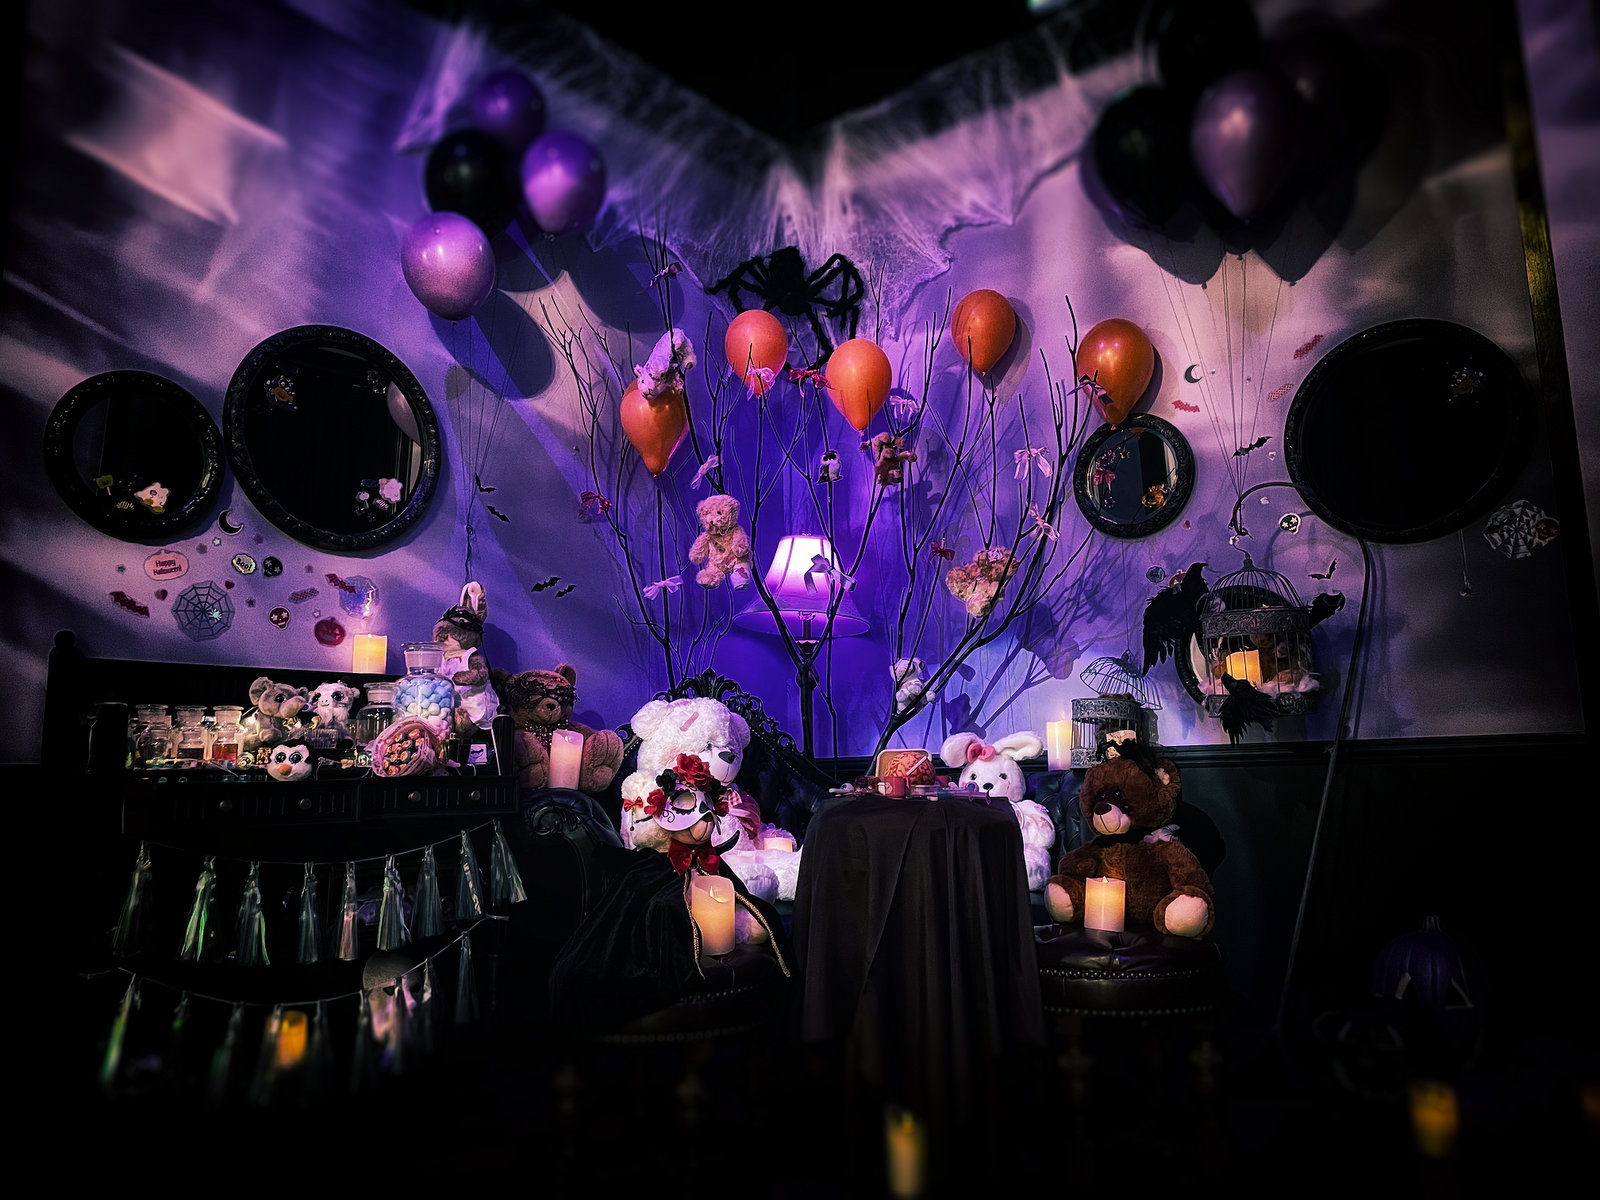 Odaiba Brings The Best Photographic Spot in Halloween History Ever!